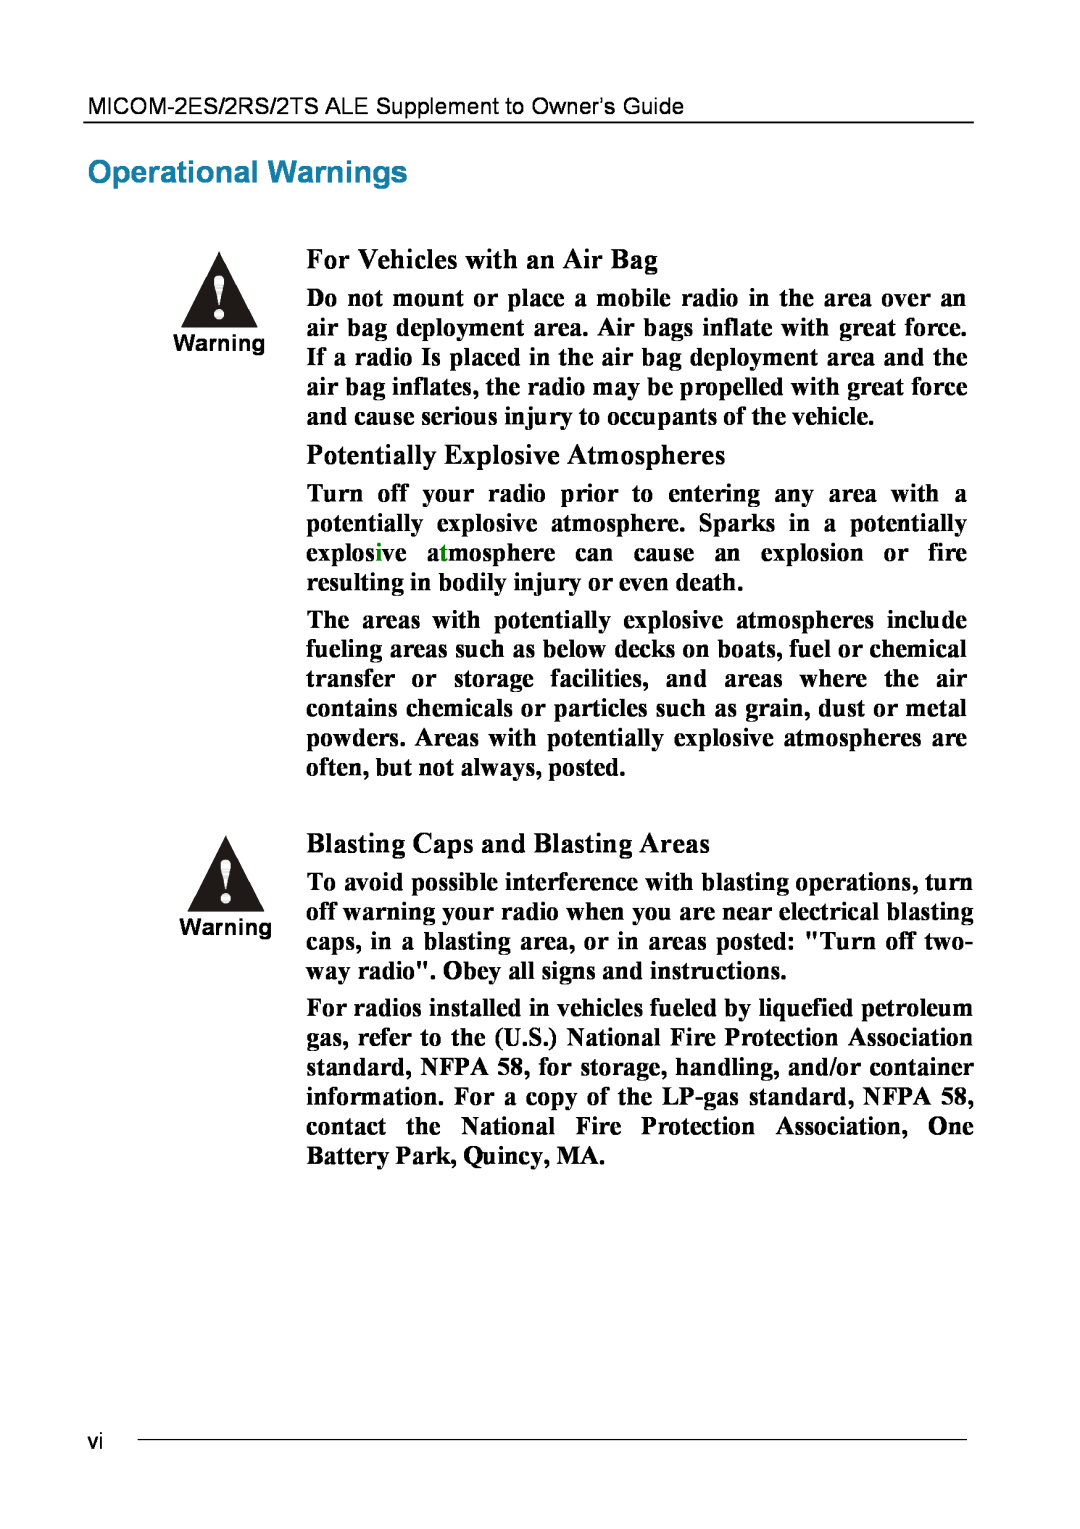 Motorola MICOM-2ES/2RS/2TS ALE manual Operational Warnings, For Vehicles with an Air Bag, Potentially Explosive Atmospheres 